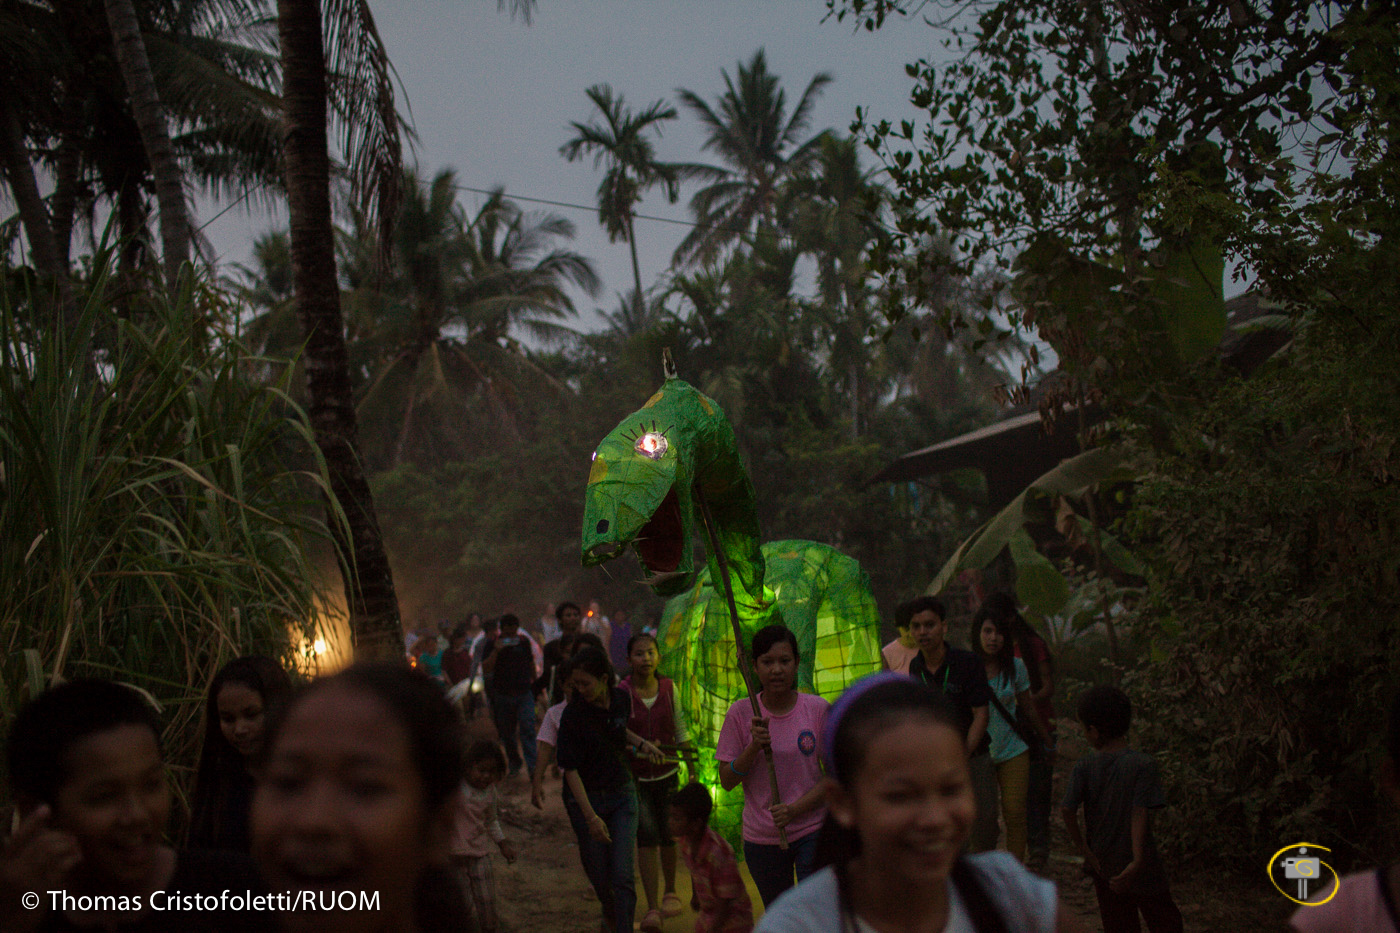 05/04/2013 - Siem Reap (Cambodia). Grace House Community Center organized a  "Puppet parade" through the surrounding villages to celebrate the Khmer New Year. The center is part of a network of trusted organizations dedicated to help kids and their families. © Thomas Cristofoletti 2013